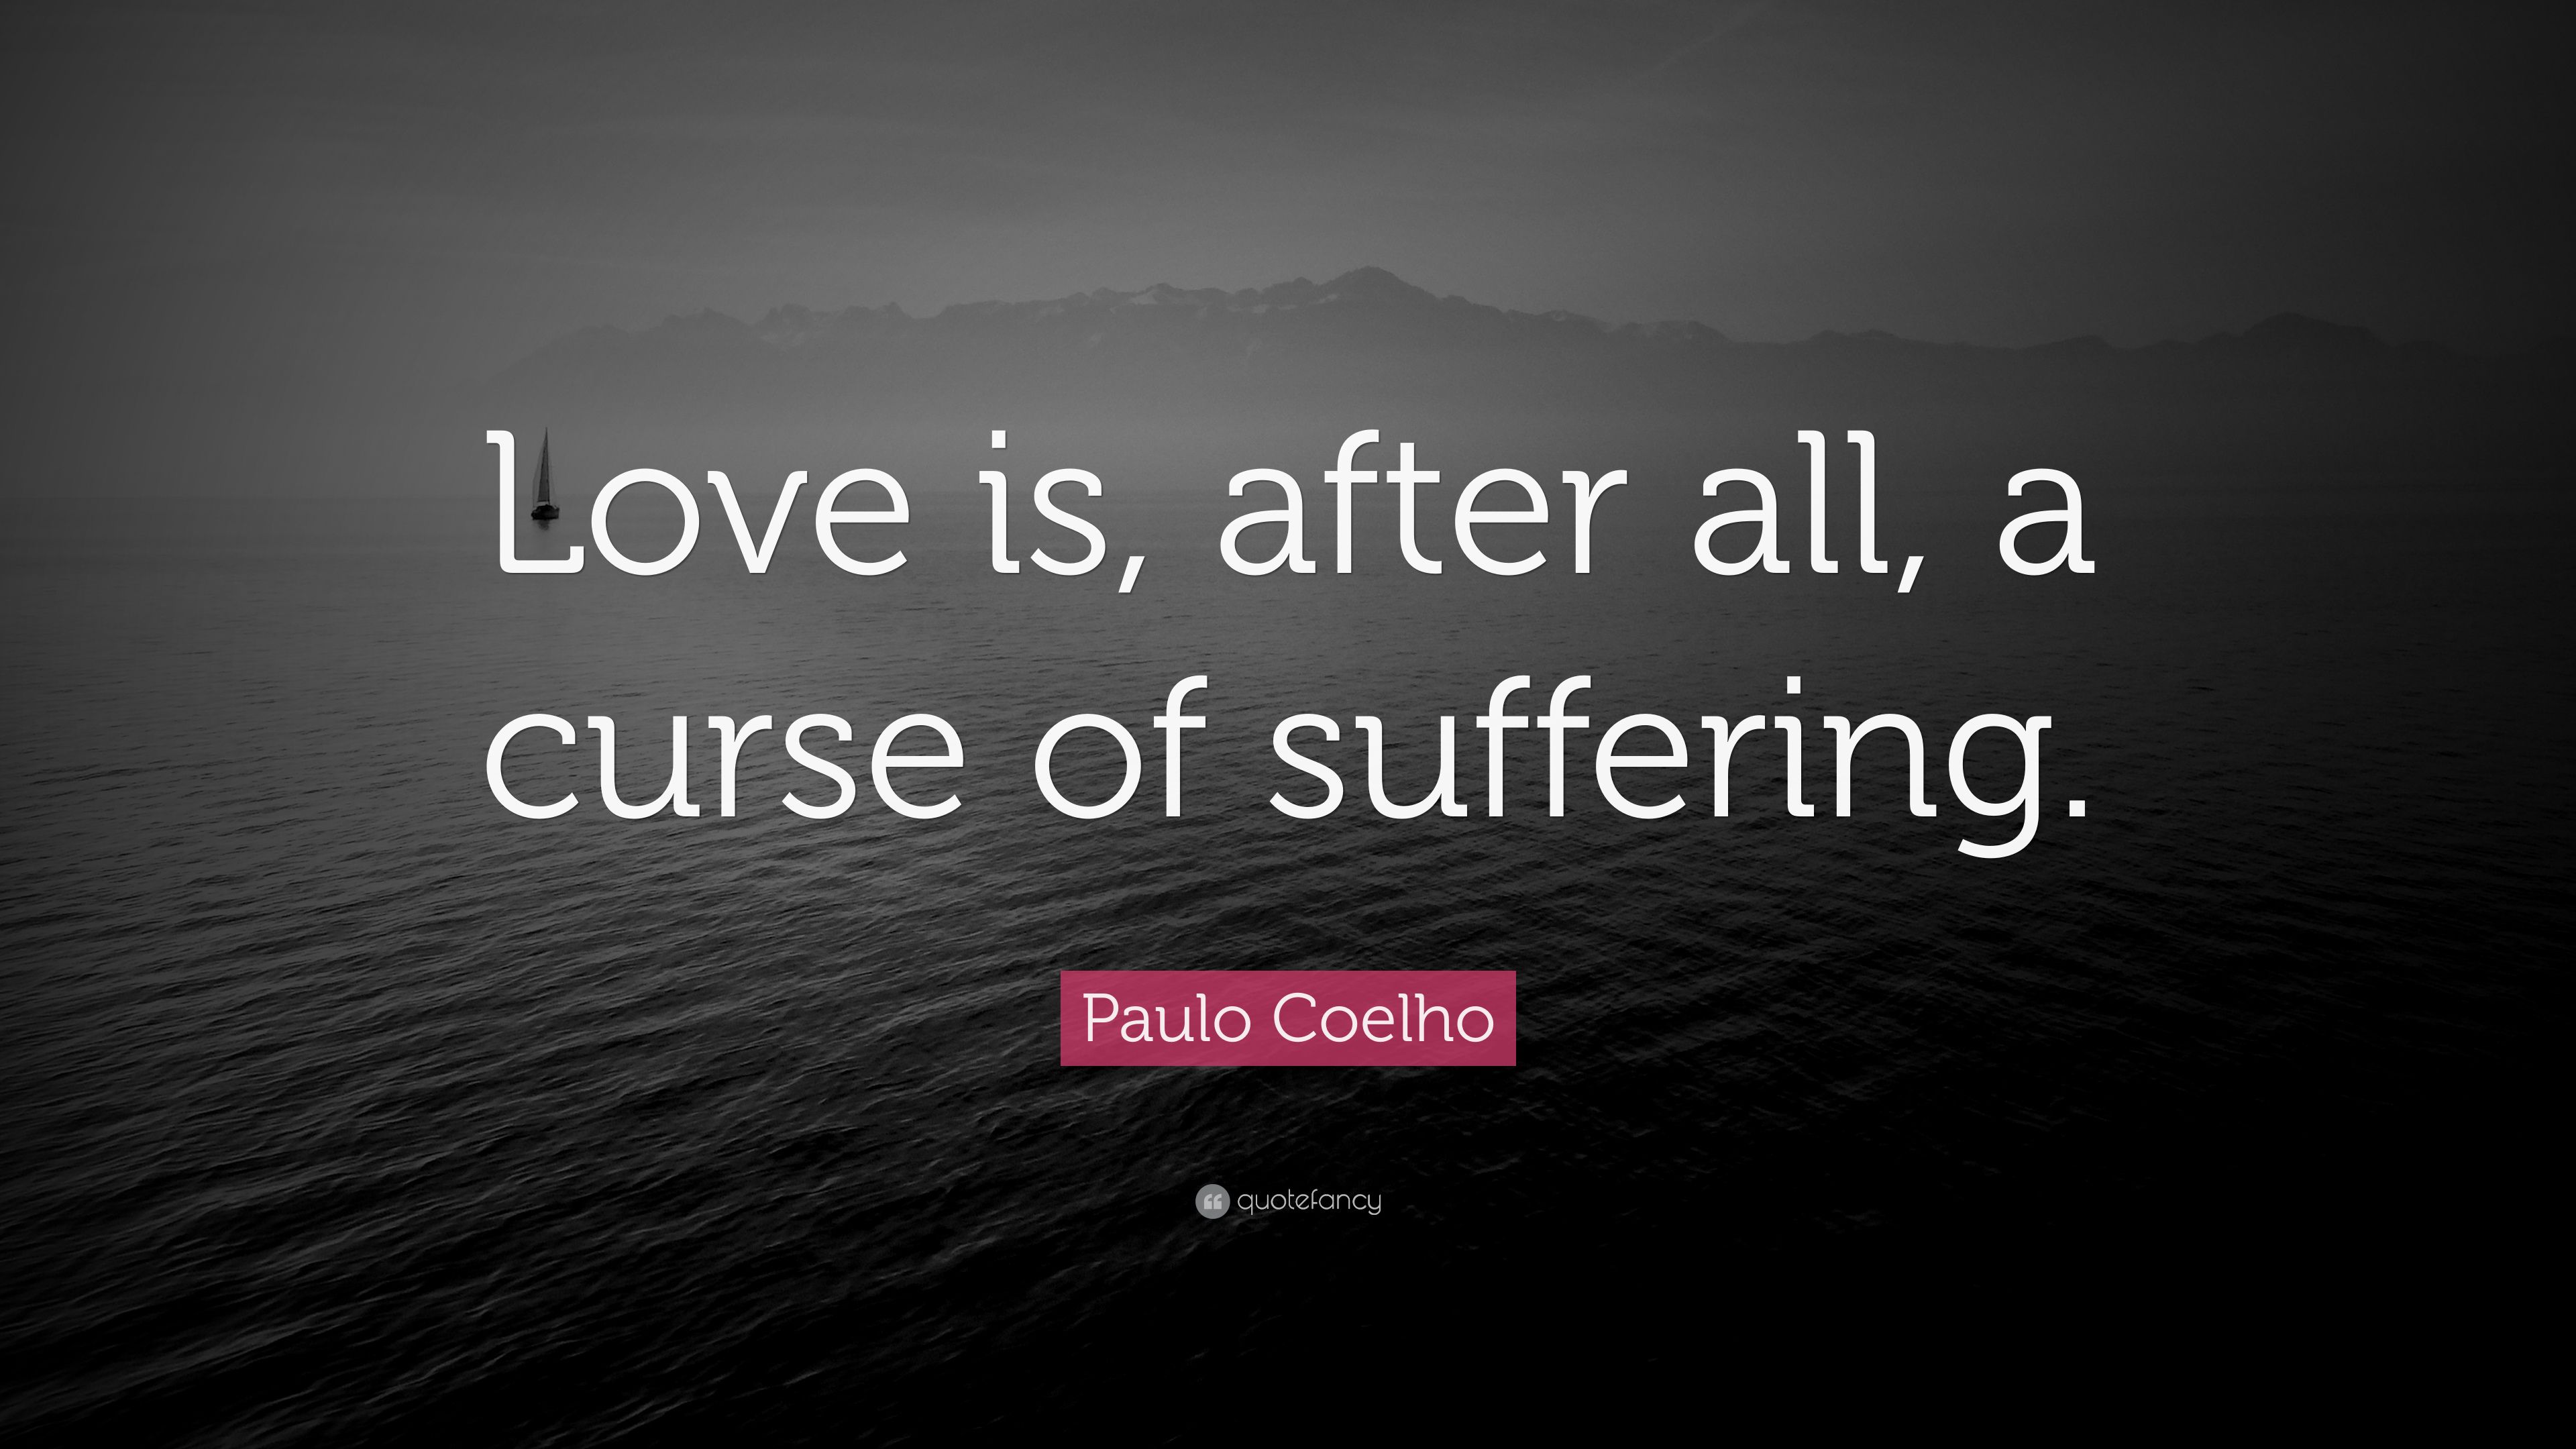 Paulo Coelho Quote: “Love is, after all, a curse of suffering.” 7